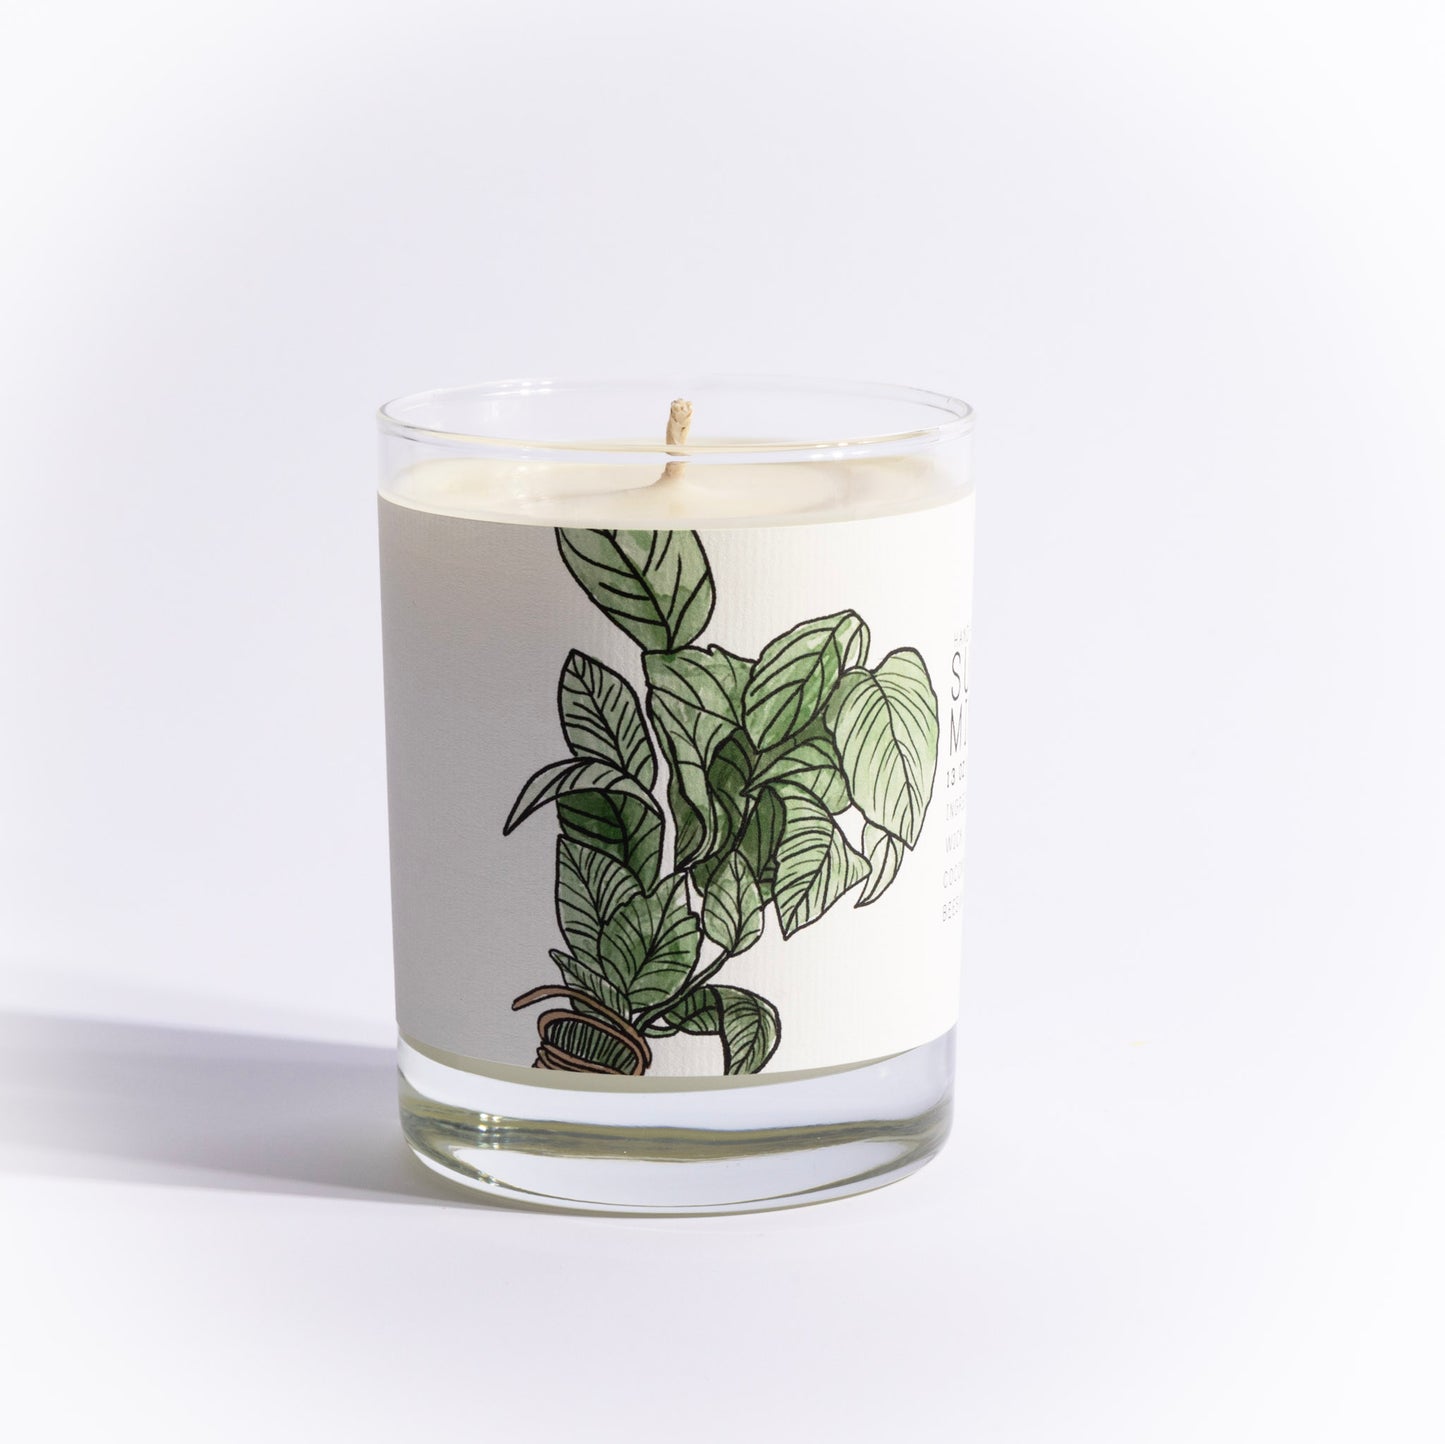 Summer Mint - Just Bee Candles